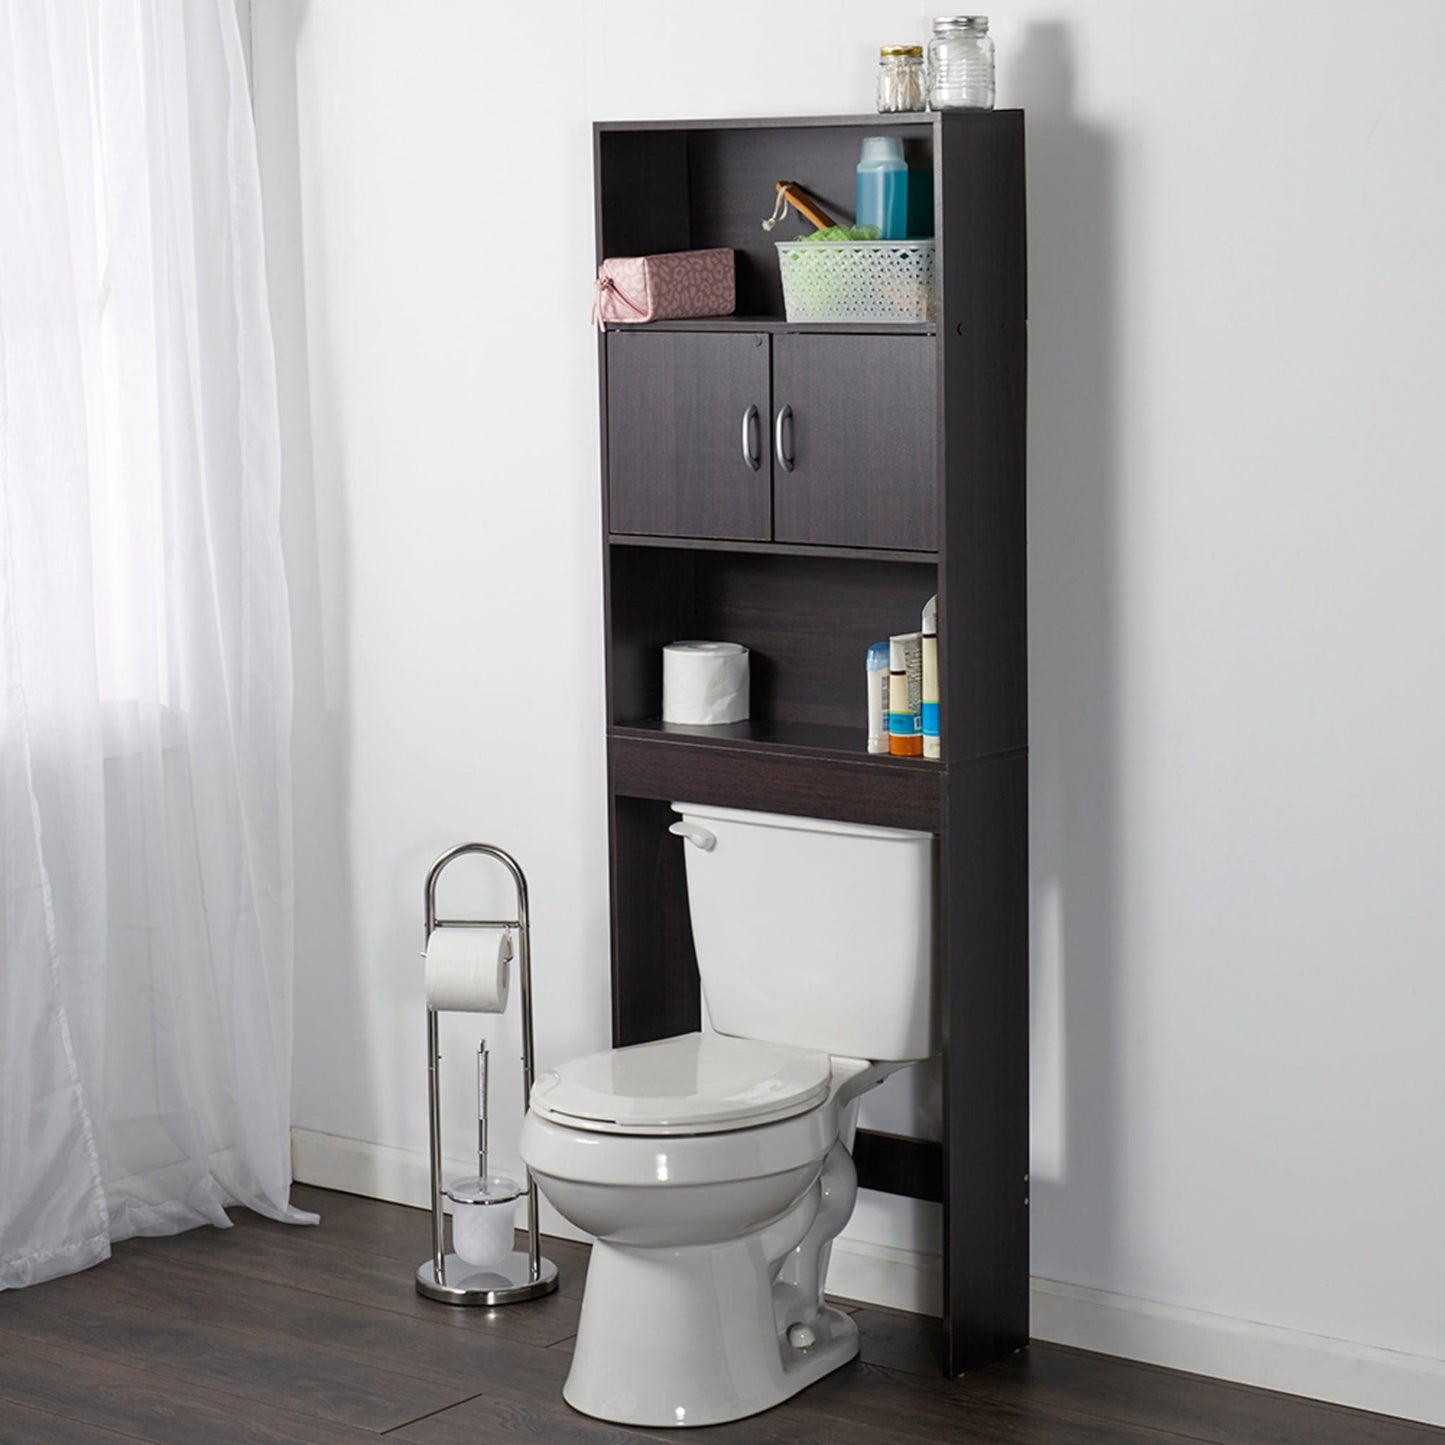 3 Tier Wood Space Saver Over the Toilet Bathroom Shelf  with Open Shelving and Cabinets, Mahogany